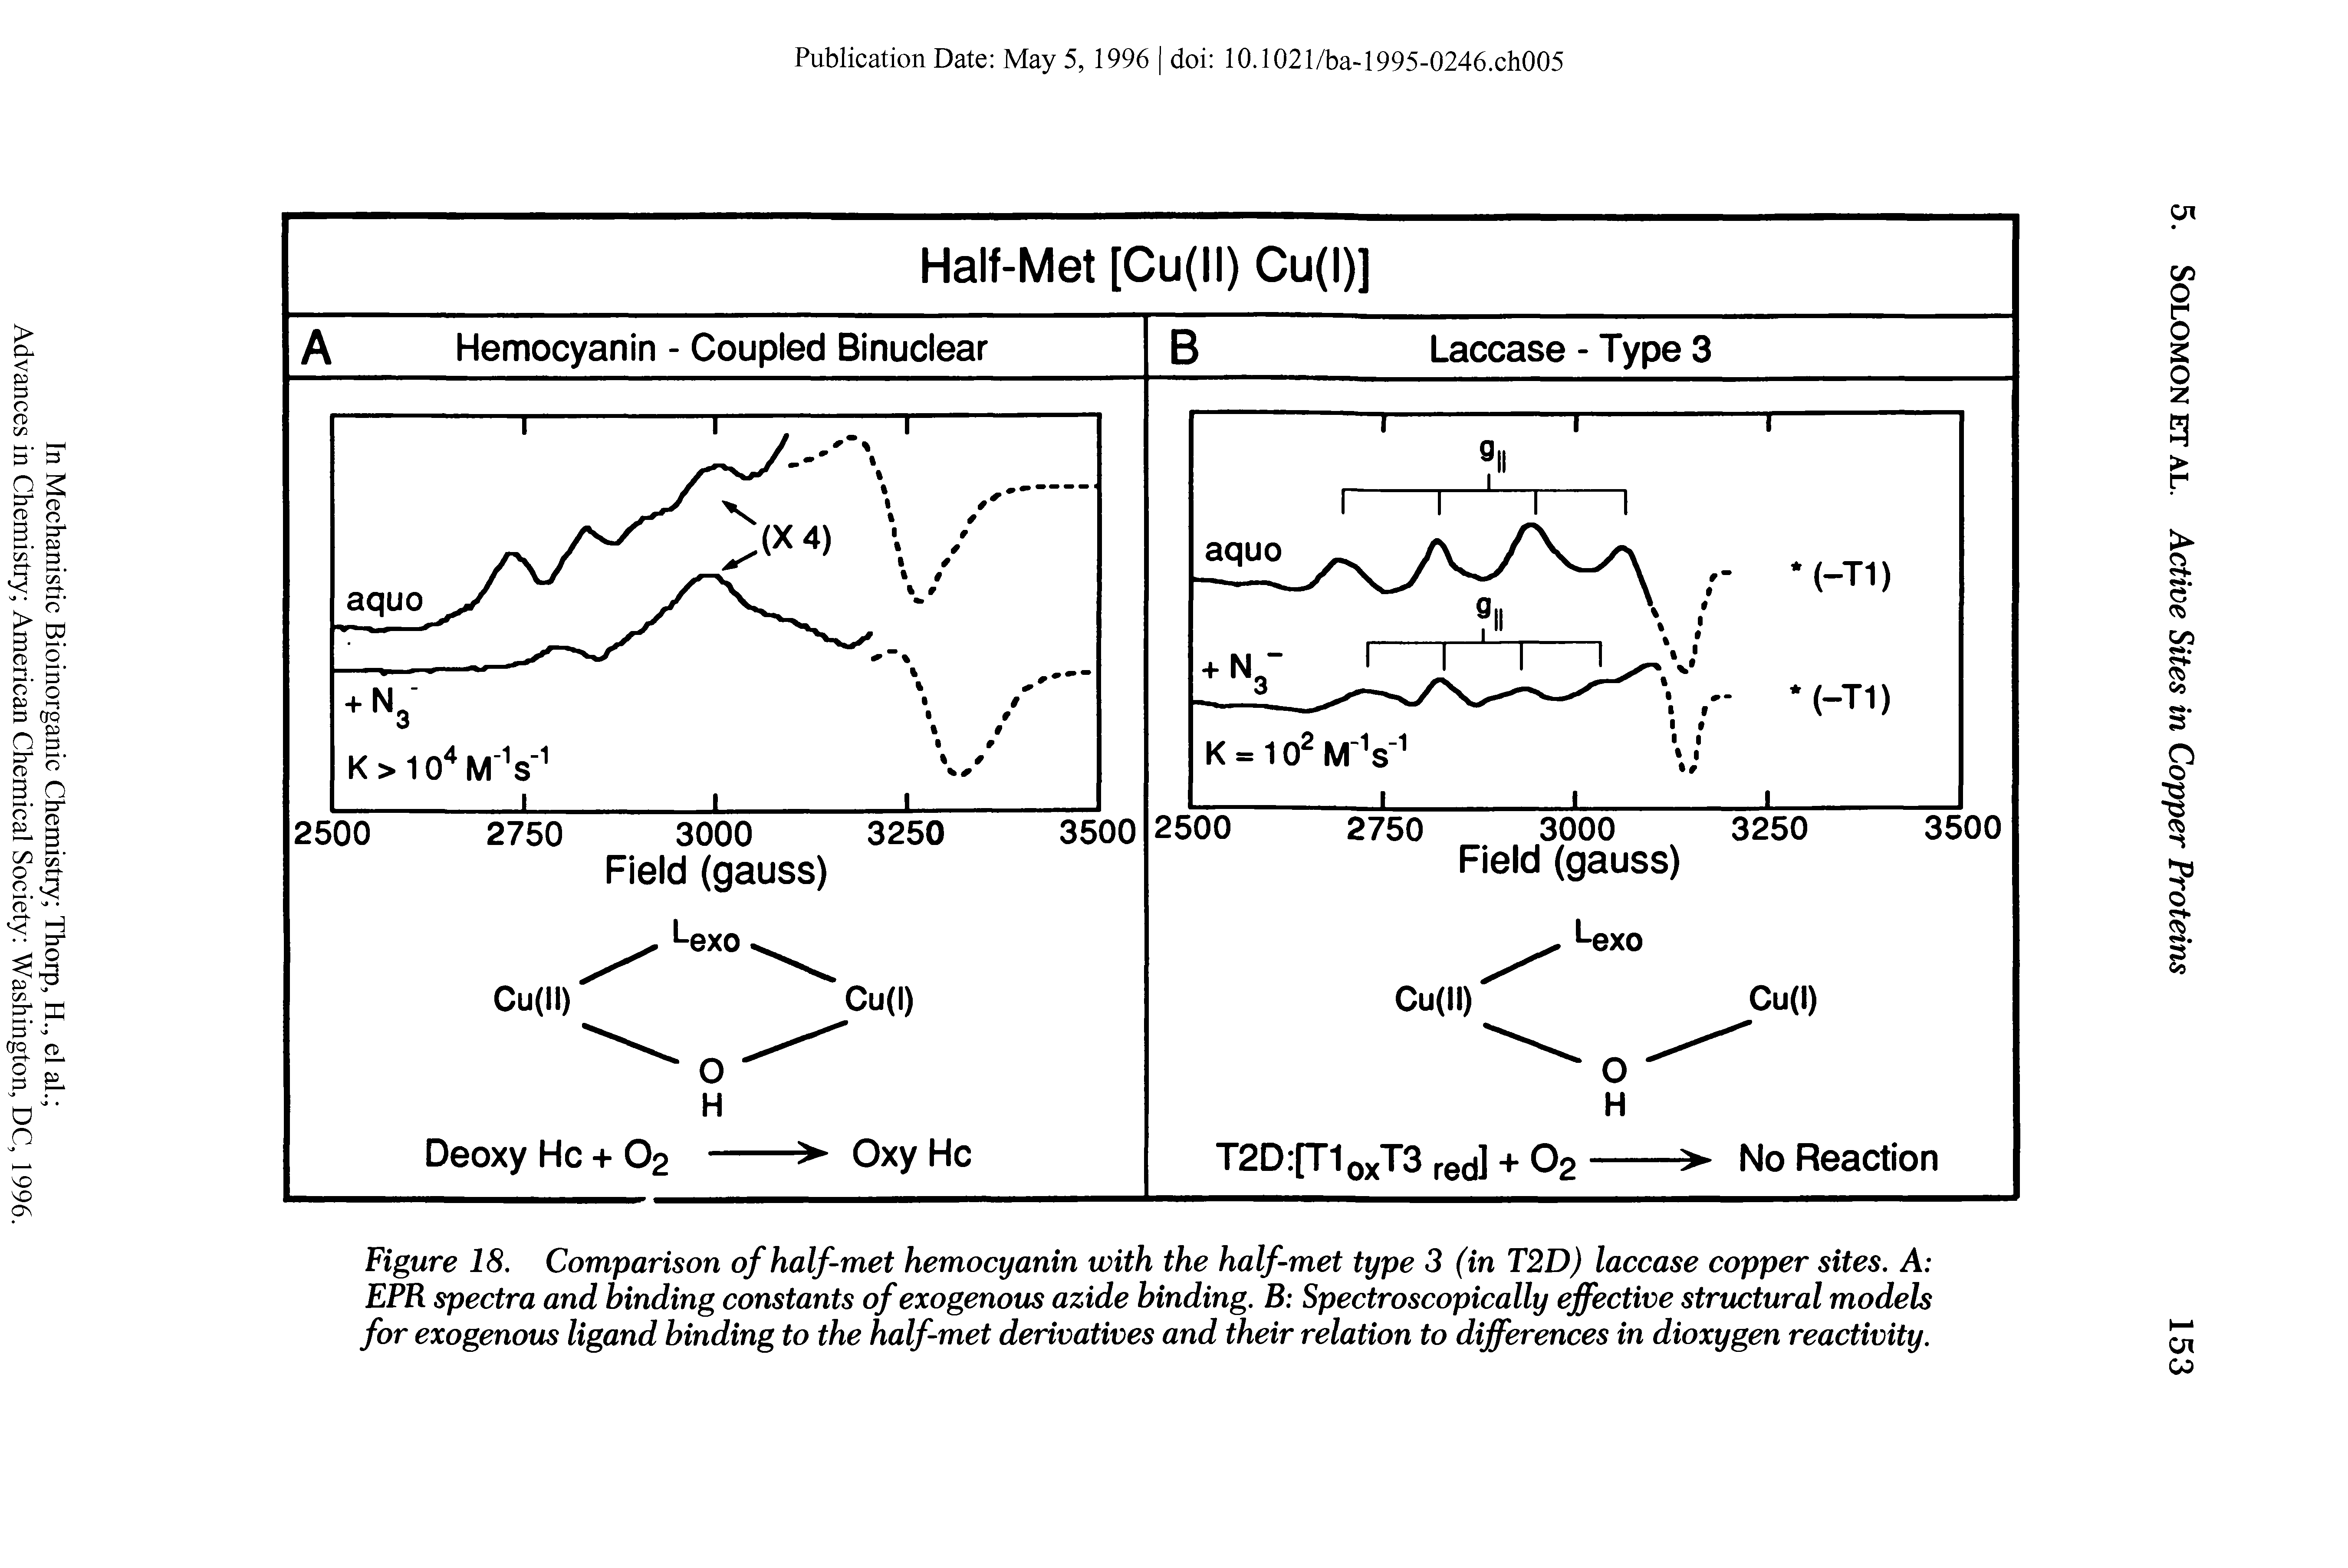 Figure 18. Comparison of half-met hemocyanin with the half-met type 3 (in T2D) laccase copper sites. A EPR spectra and binding constants of exogenous azide binding. B Spectroscopically effective structural models for exogenous ligand binding to the half-met derivatives and their relation to differences in dioxygen reactivity.